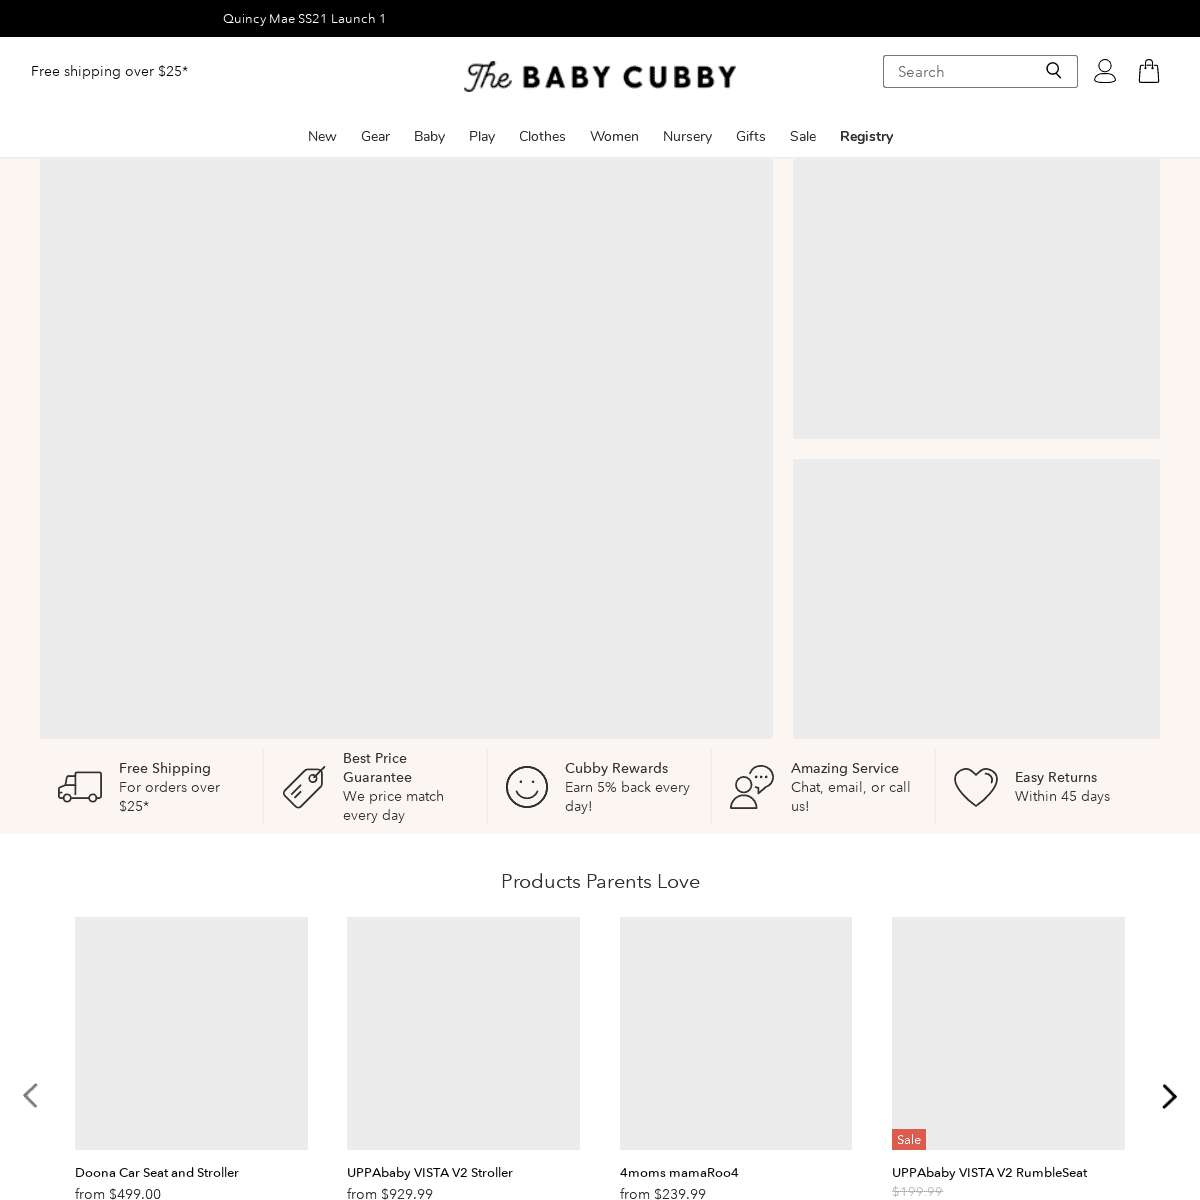 A complete backup of https://babycubby.com